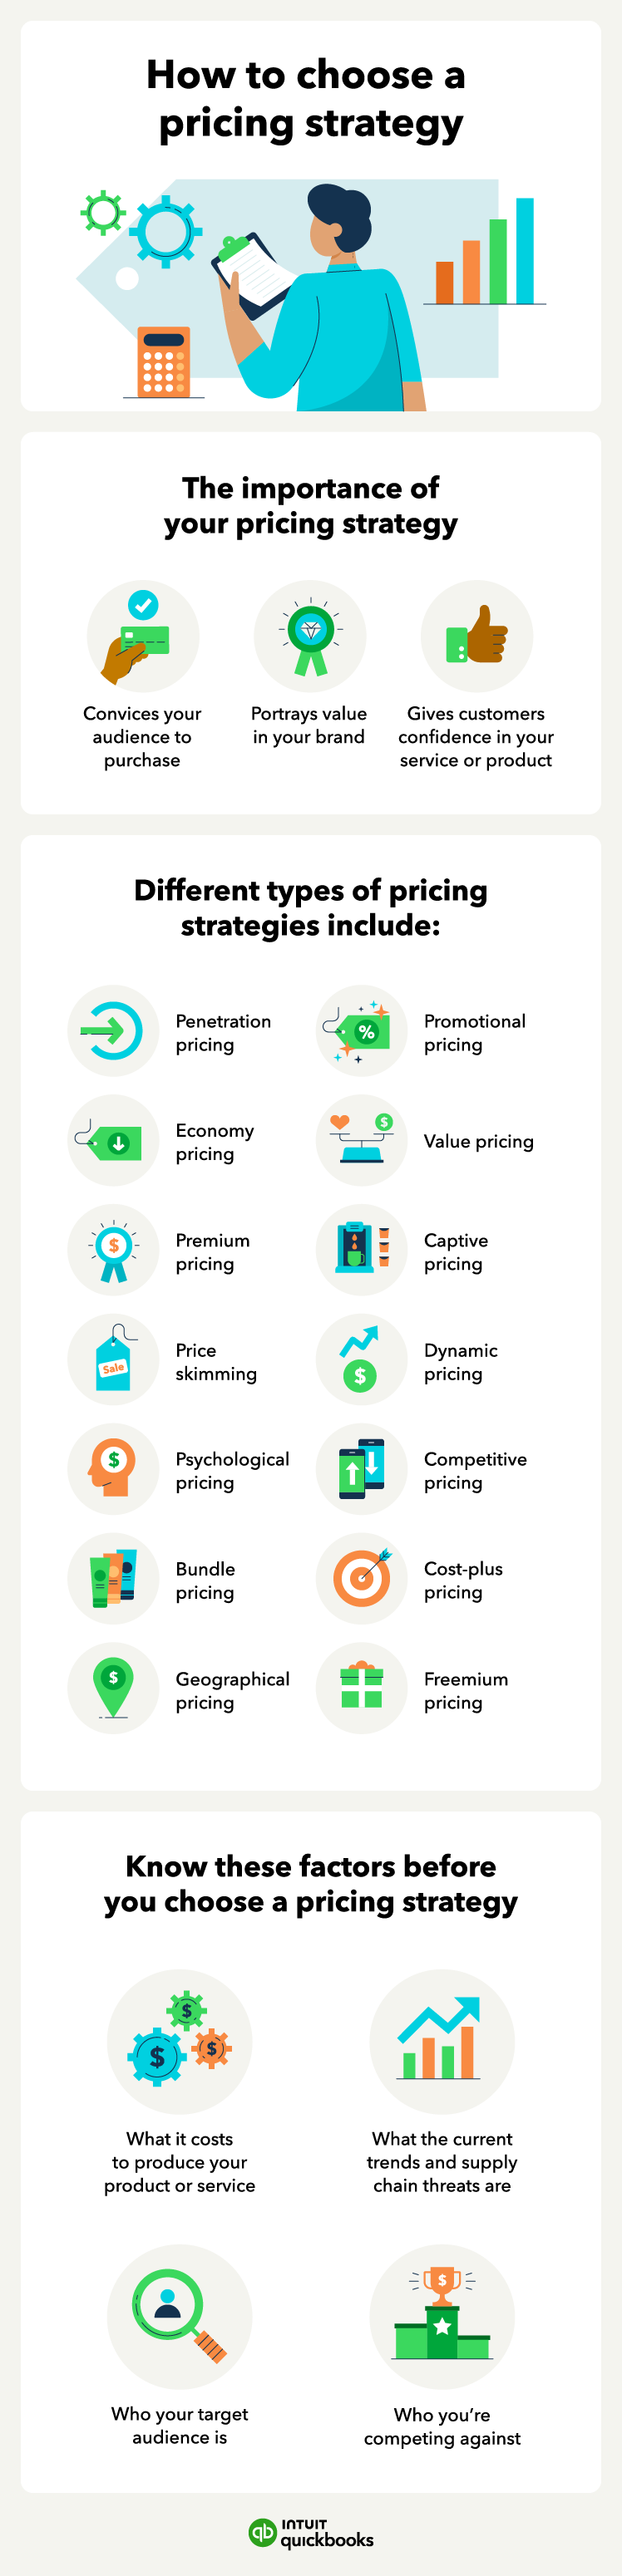 An infographic overviewing the pricing strategies, including the importance of picking the right one, and things to know